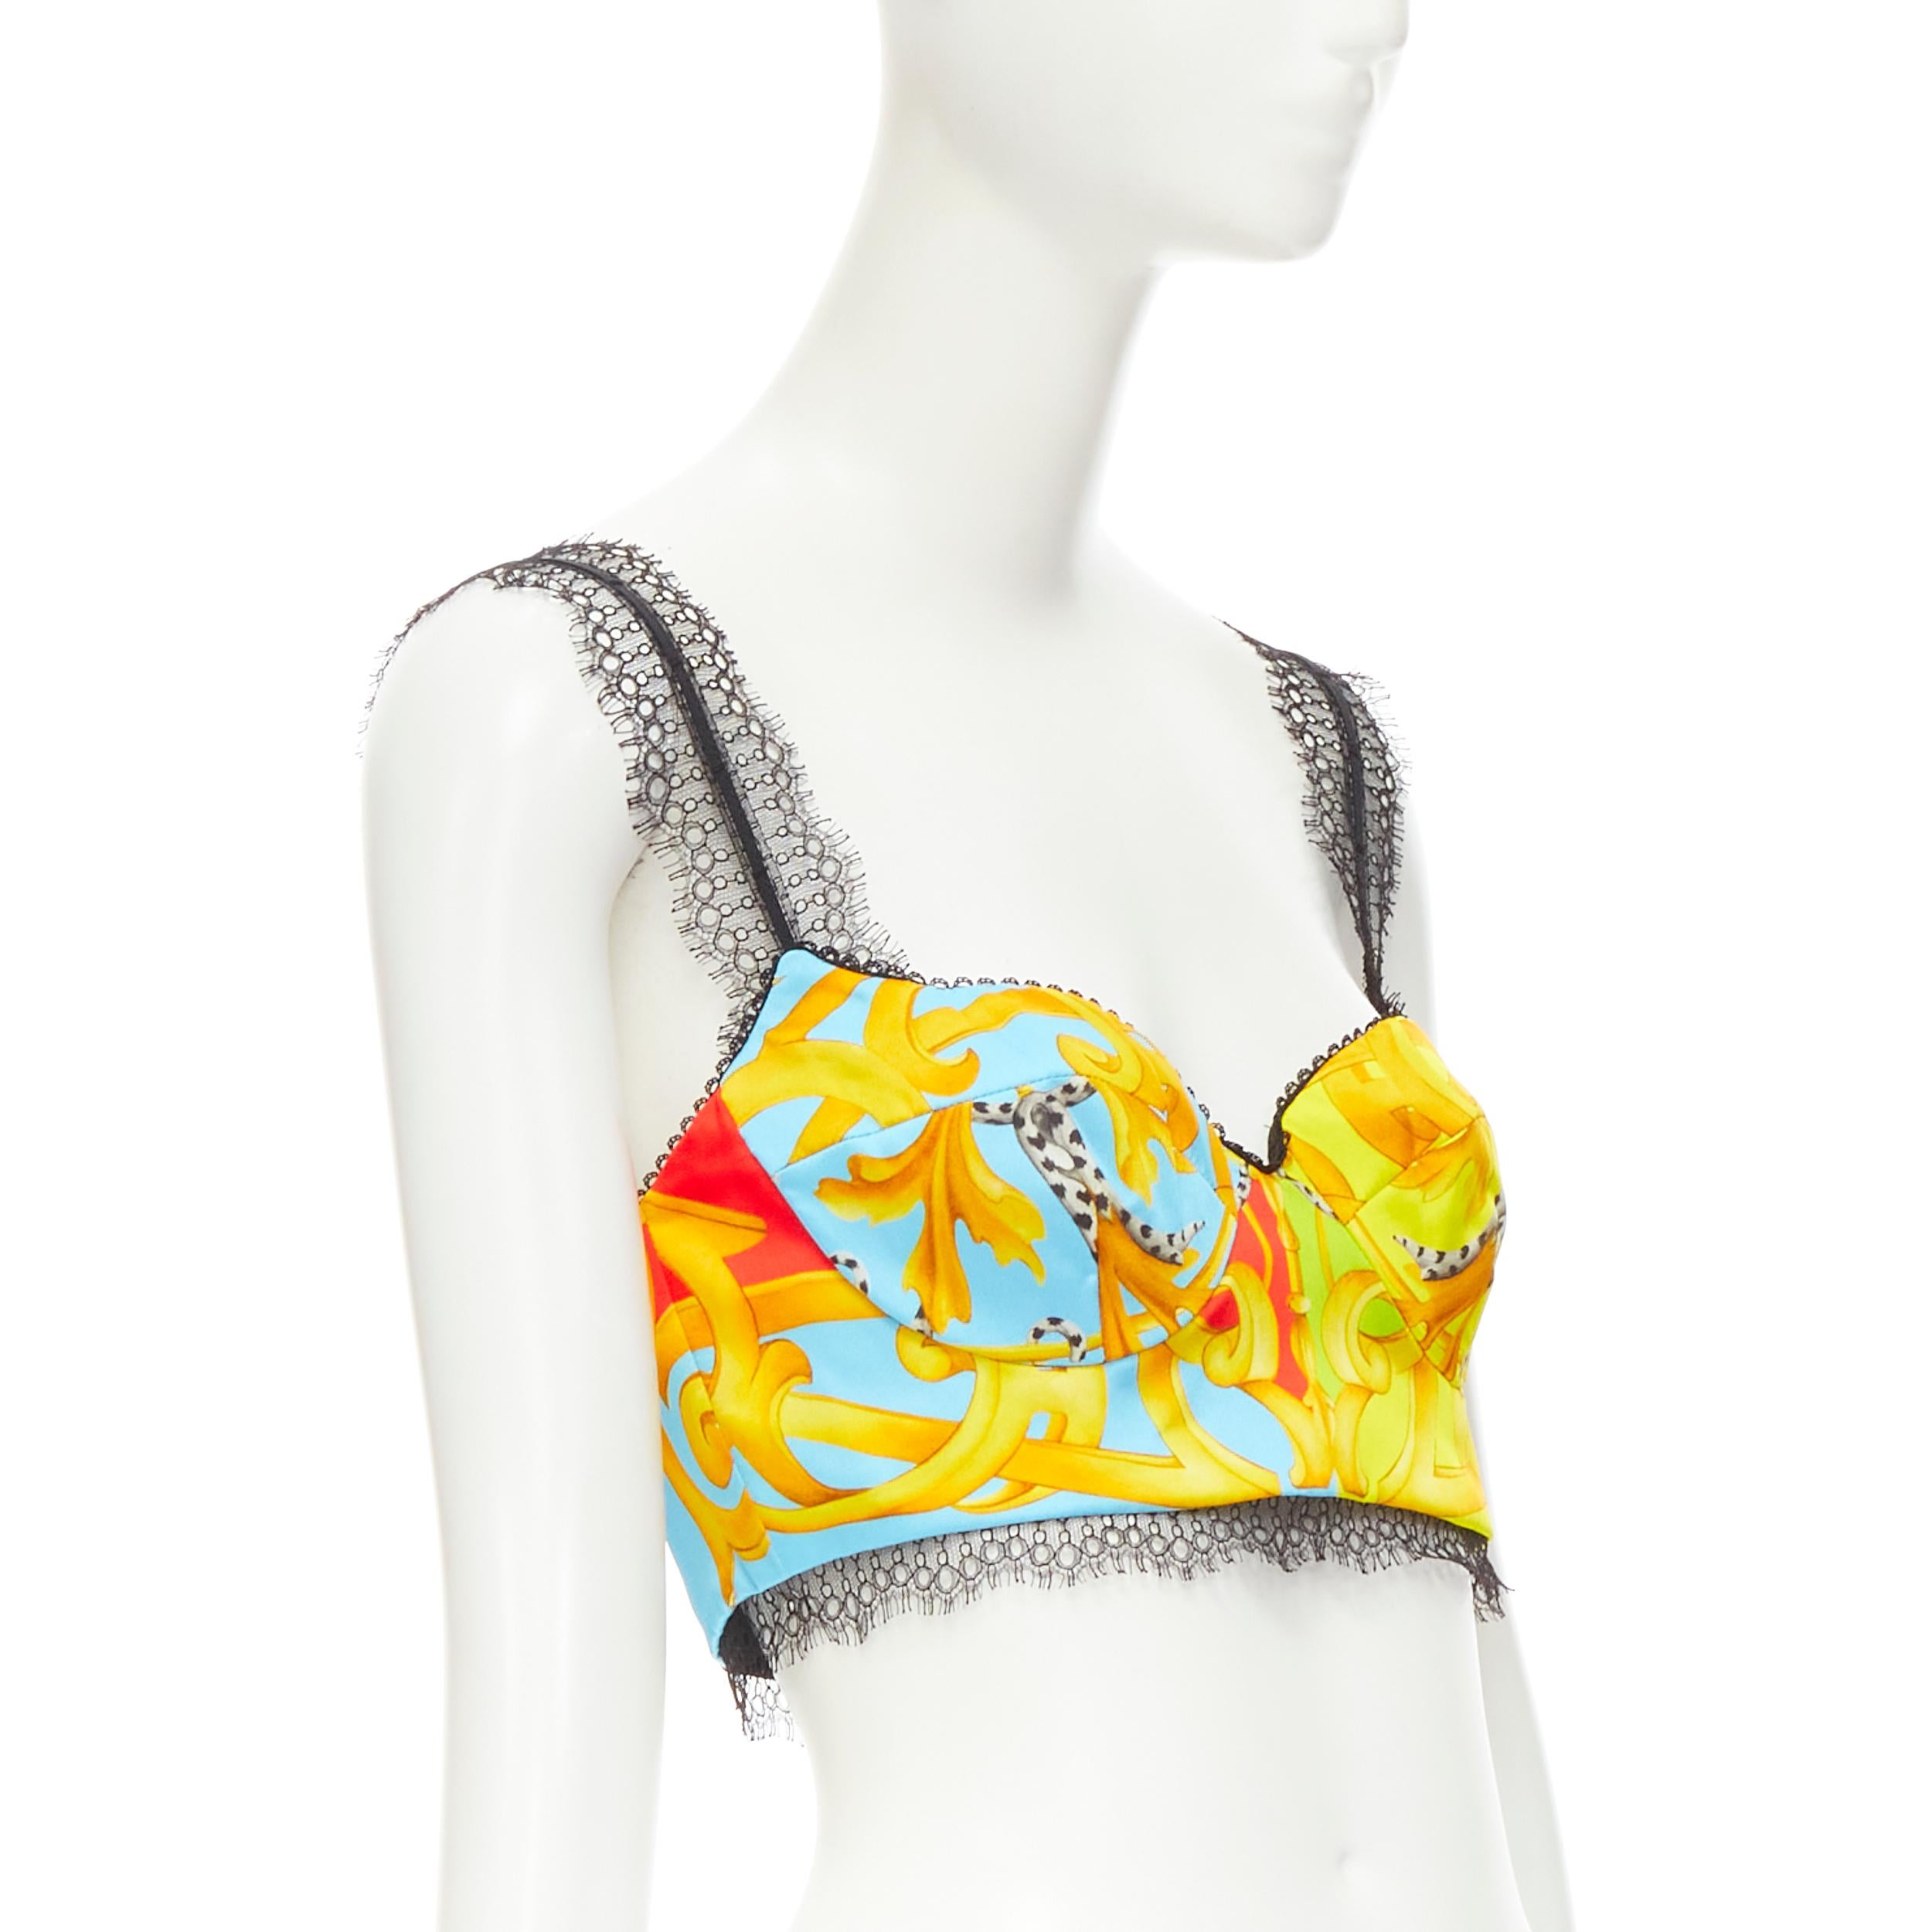 new VERSACE Barocco Acanthus Pop lace boned bustier bralette crop top XS IT38
Brand: Versace
Collection: Pop Acanthus Barocco 
Extra Detail: Signature Versace boned bustier bralette continuously renewed in new prints every season. Sweetheart